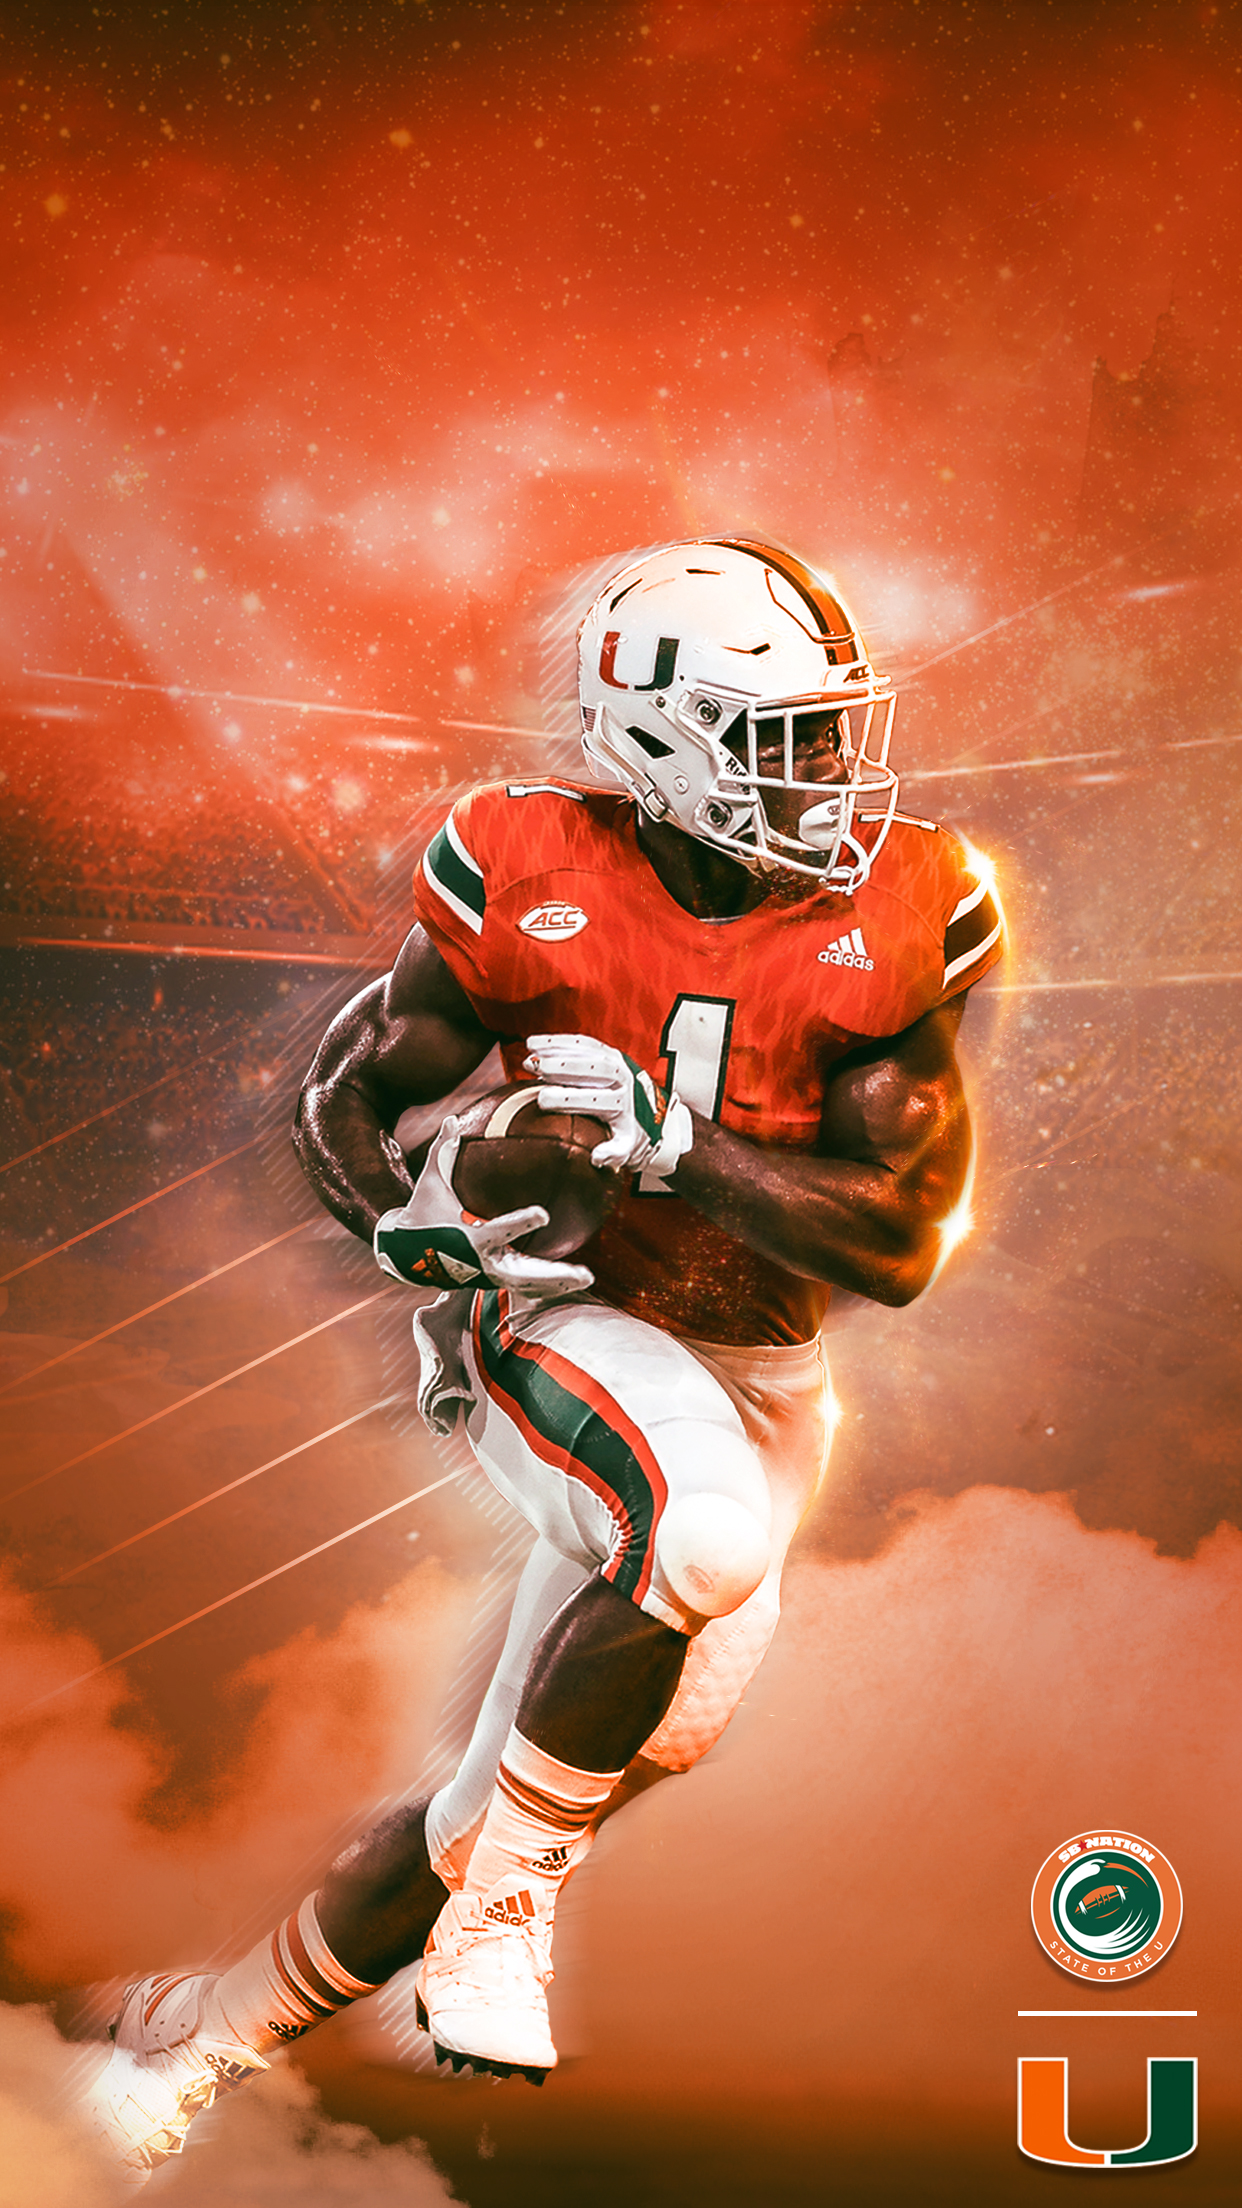 Rb1 Getty Images Photo, Mike Meredith/state Of The - Miami Hurricanes Football , HD Wallpaper & Backgrounds